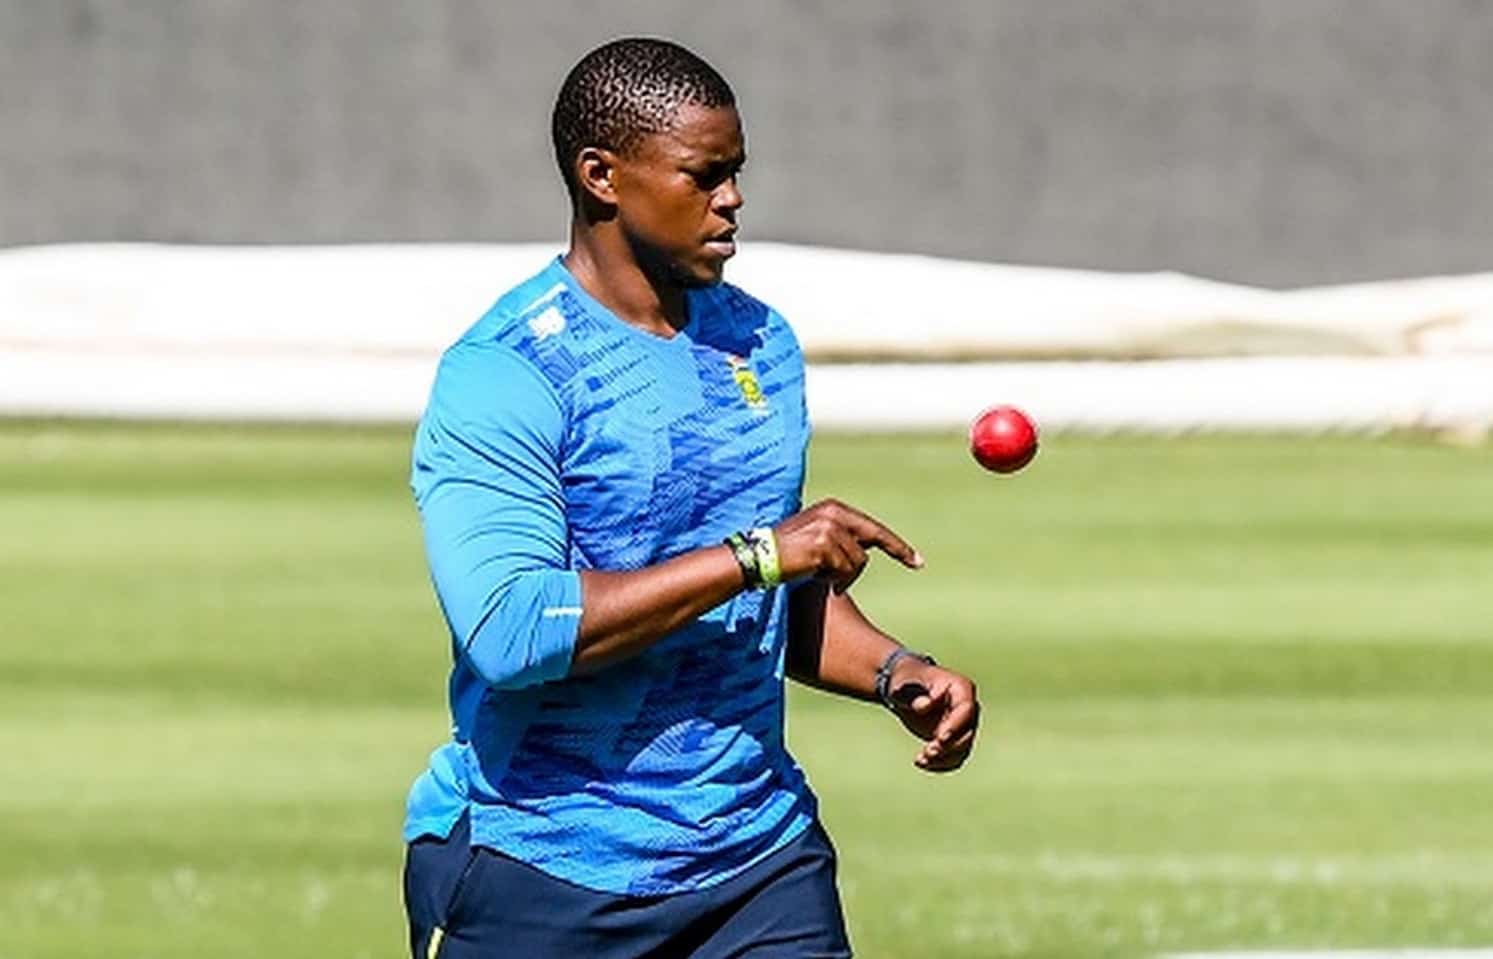  South Africa suffered a major setback against Ireland that fast bowler Sisanda Magala out of the series